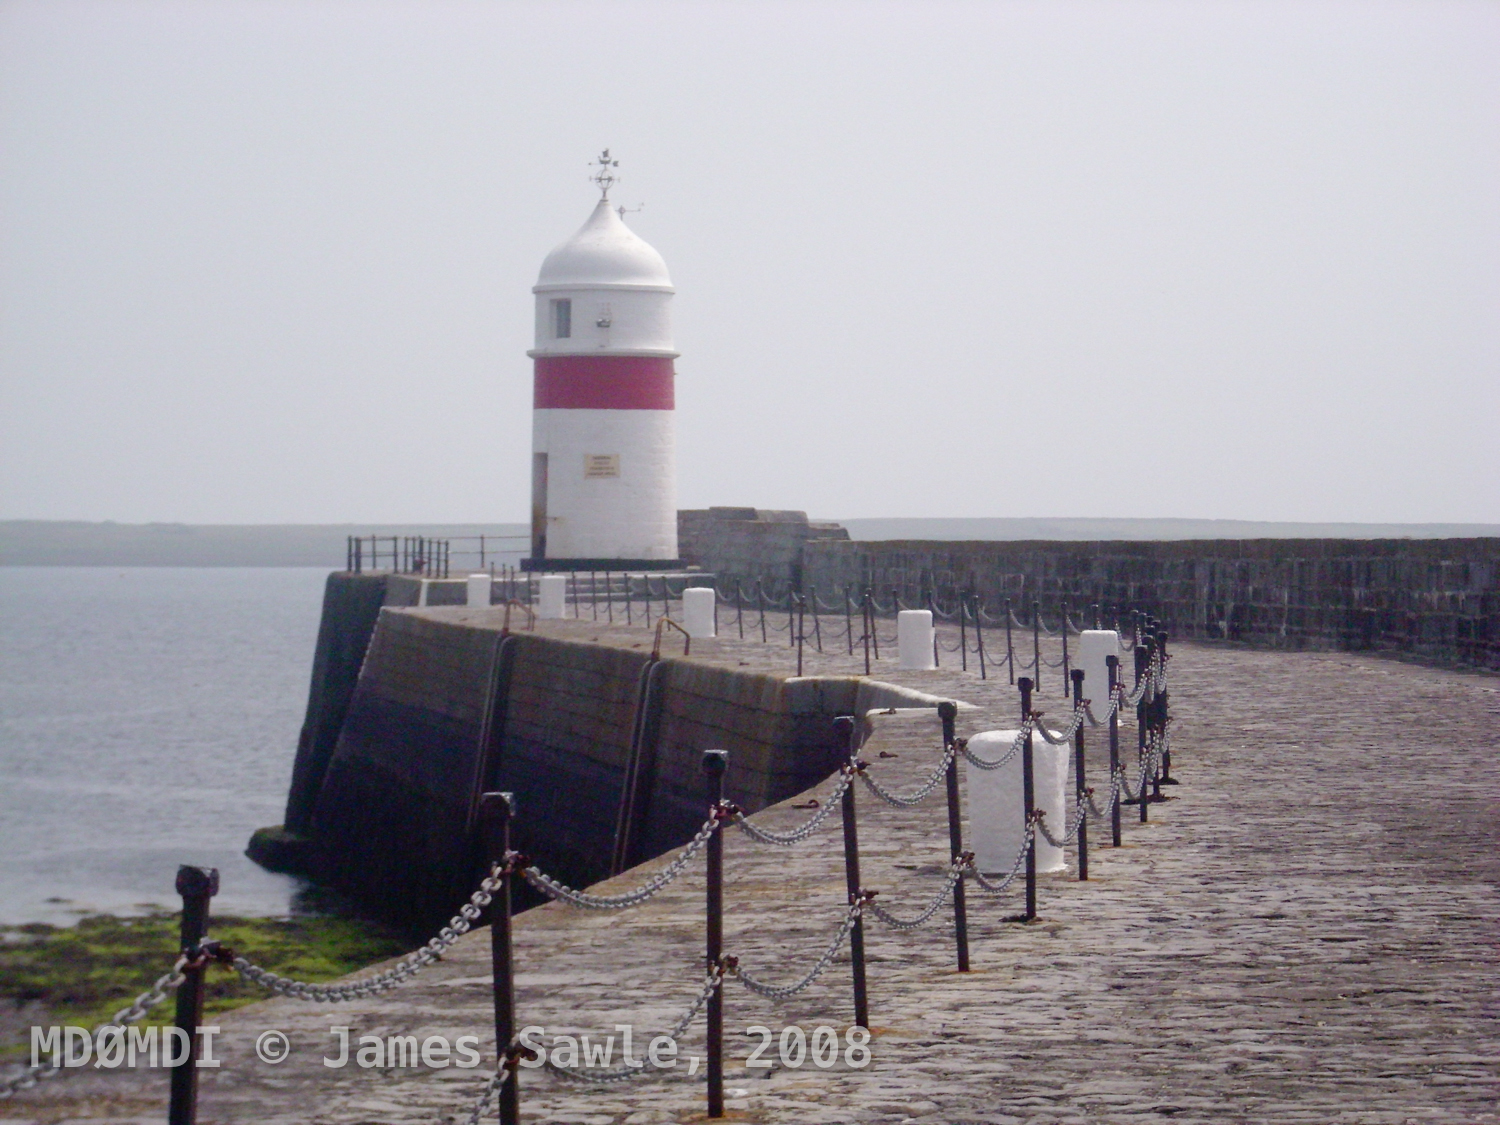 The small Lighthouse at the entrance to Castletown's harbour